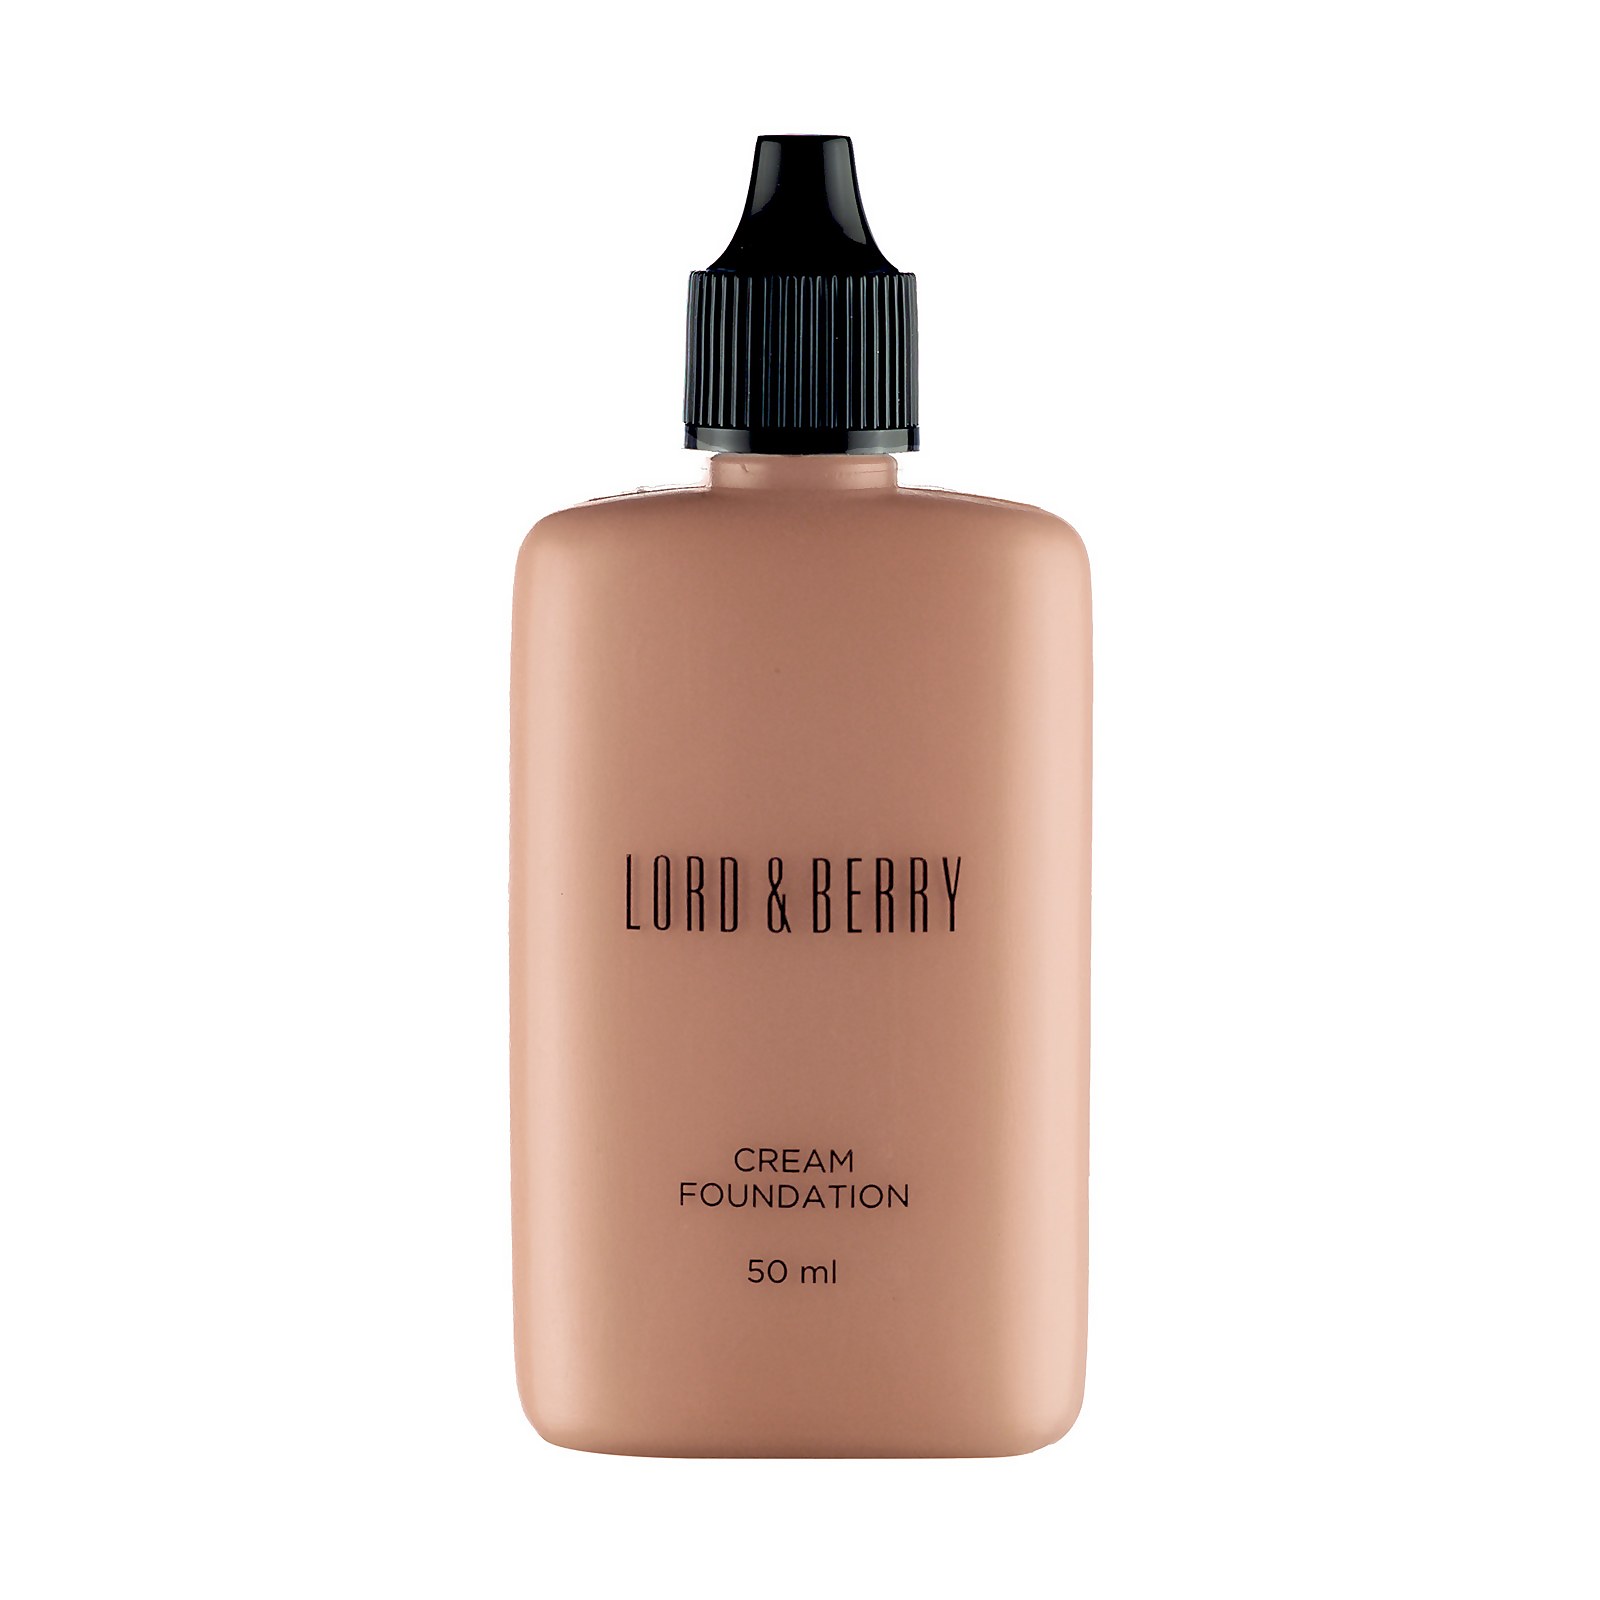 Lord & Berry Cream Foundation 50ml (Various Shades) - Suede von Lord & Berry